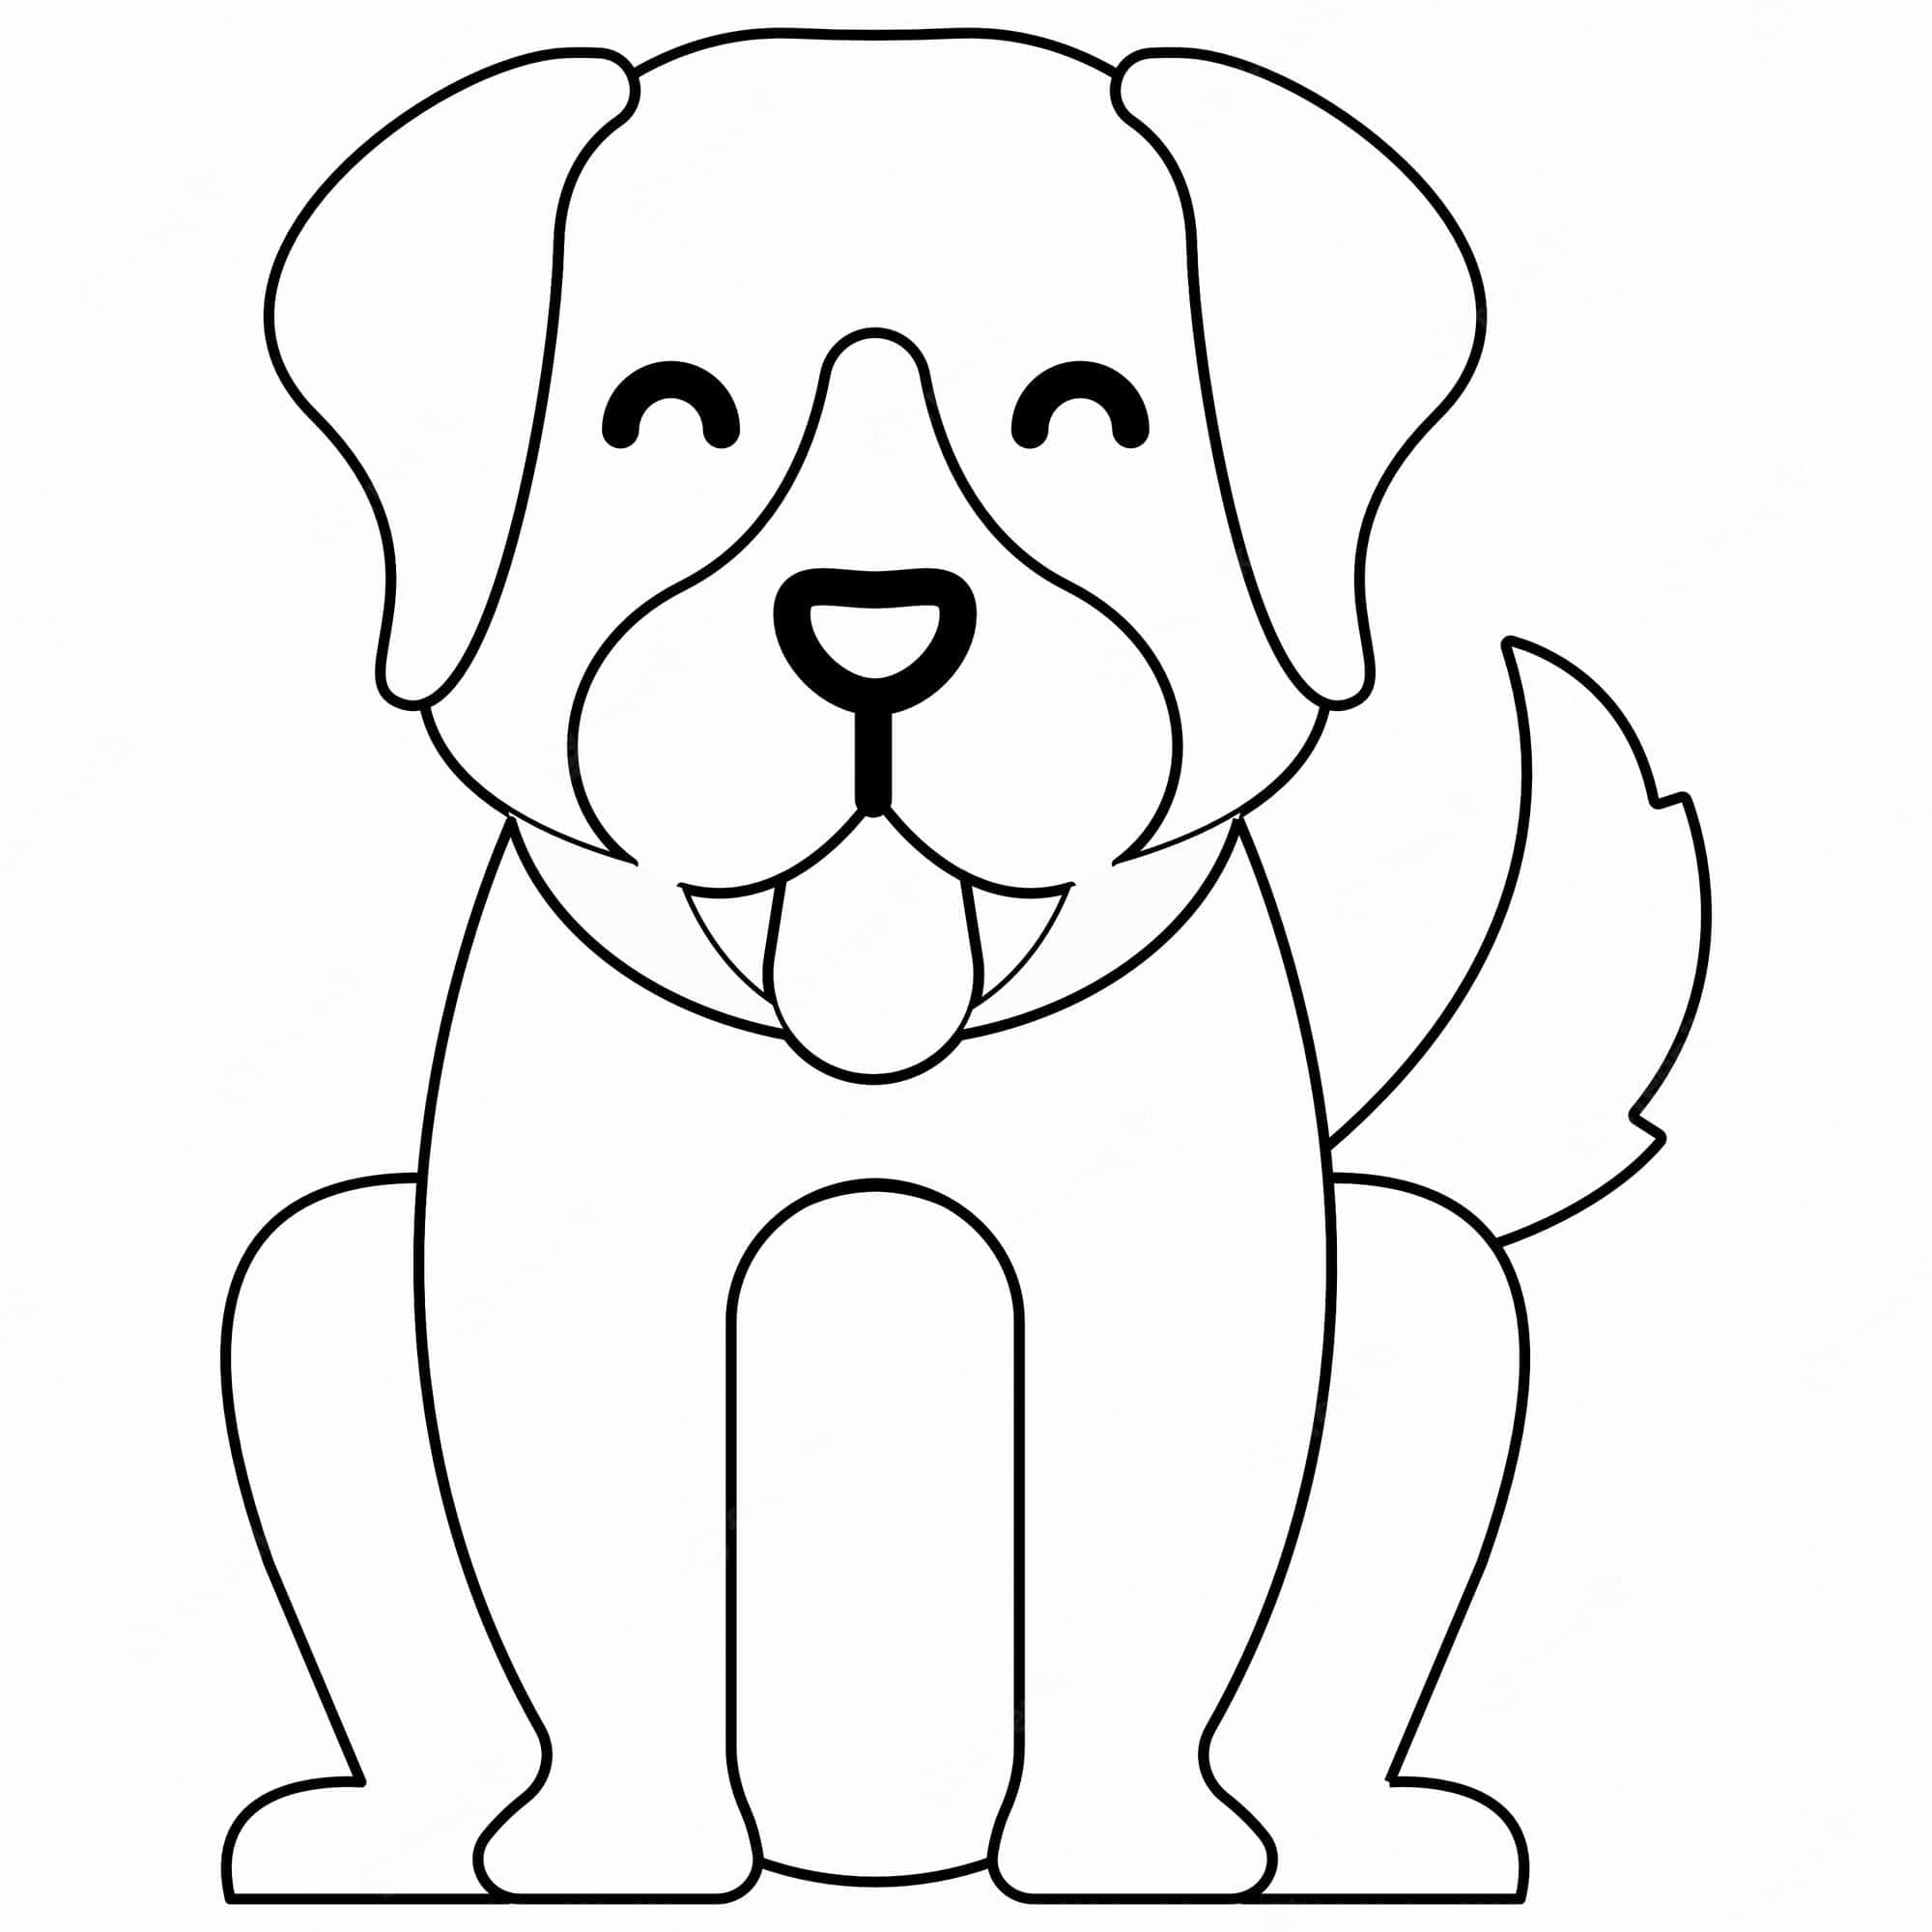 How to Draw a Dog | Step-by-Step Guide | 2 Tutorials Inside